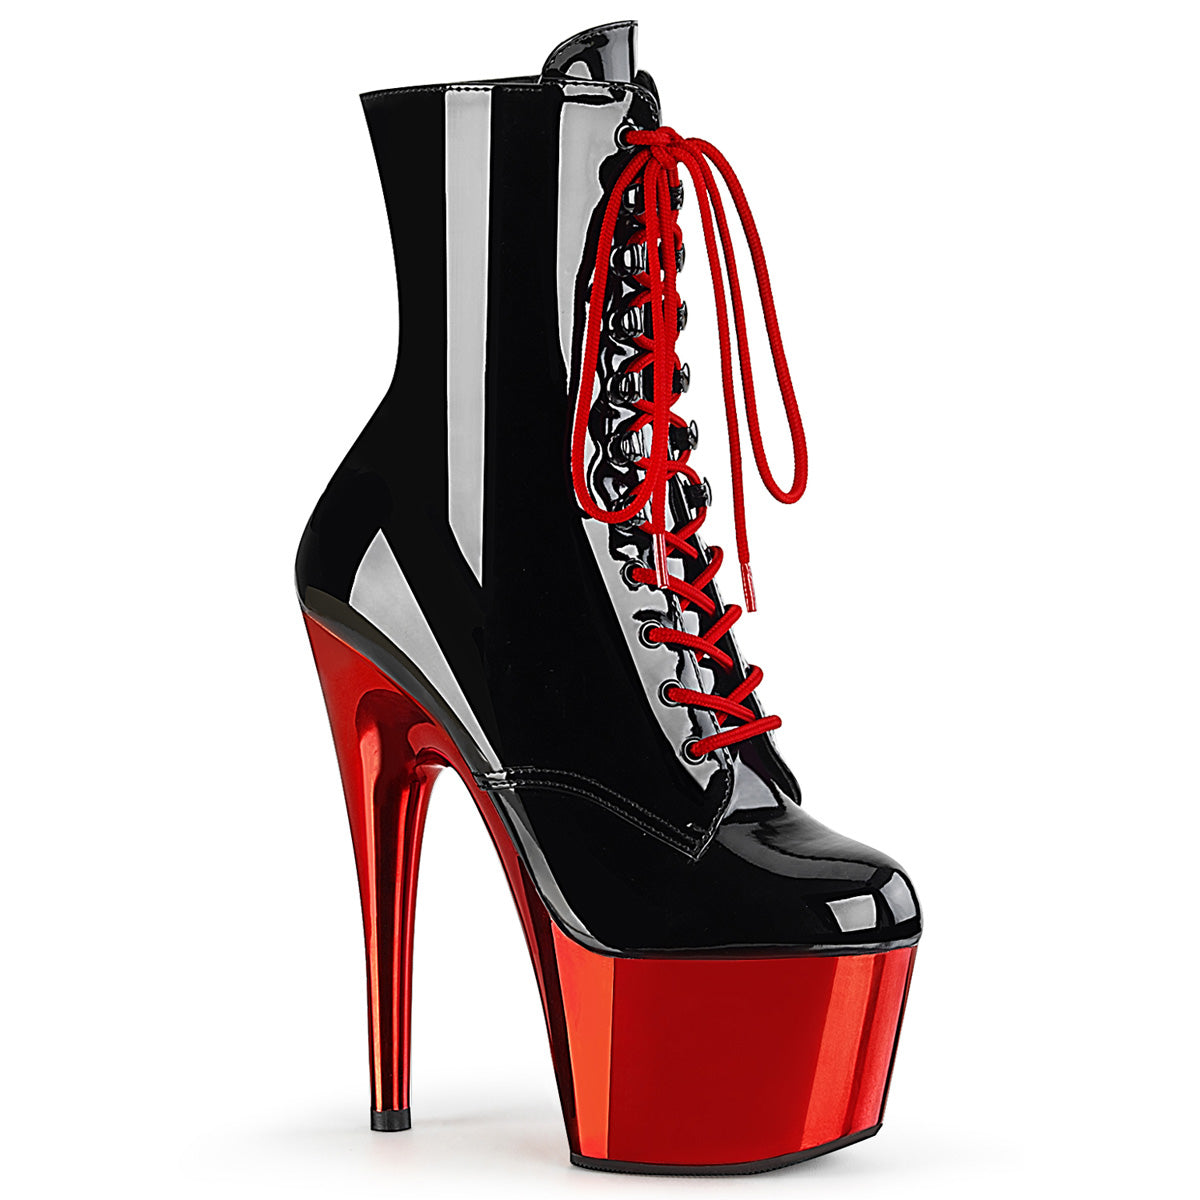 ADORE-1020 7" Red Chrome Exotic Dance Ankle Boots